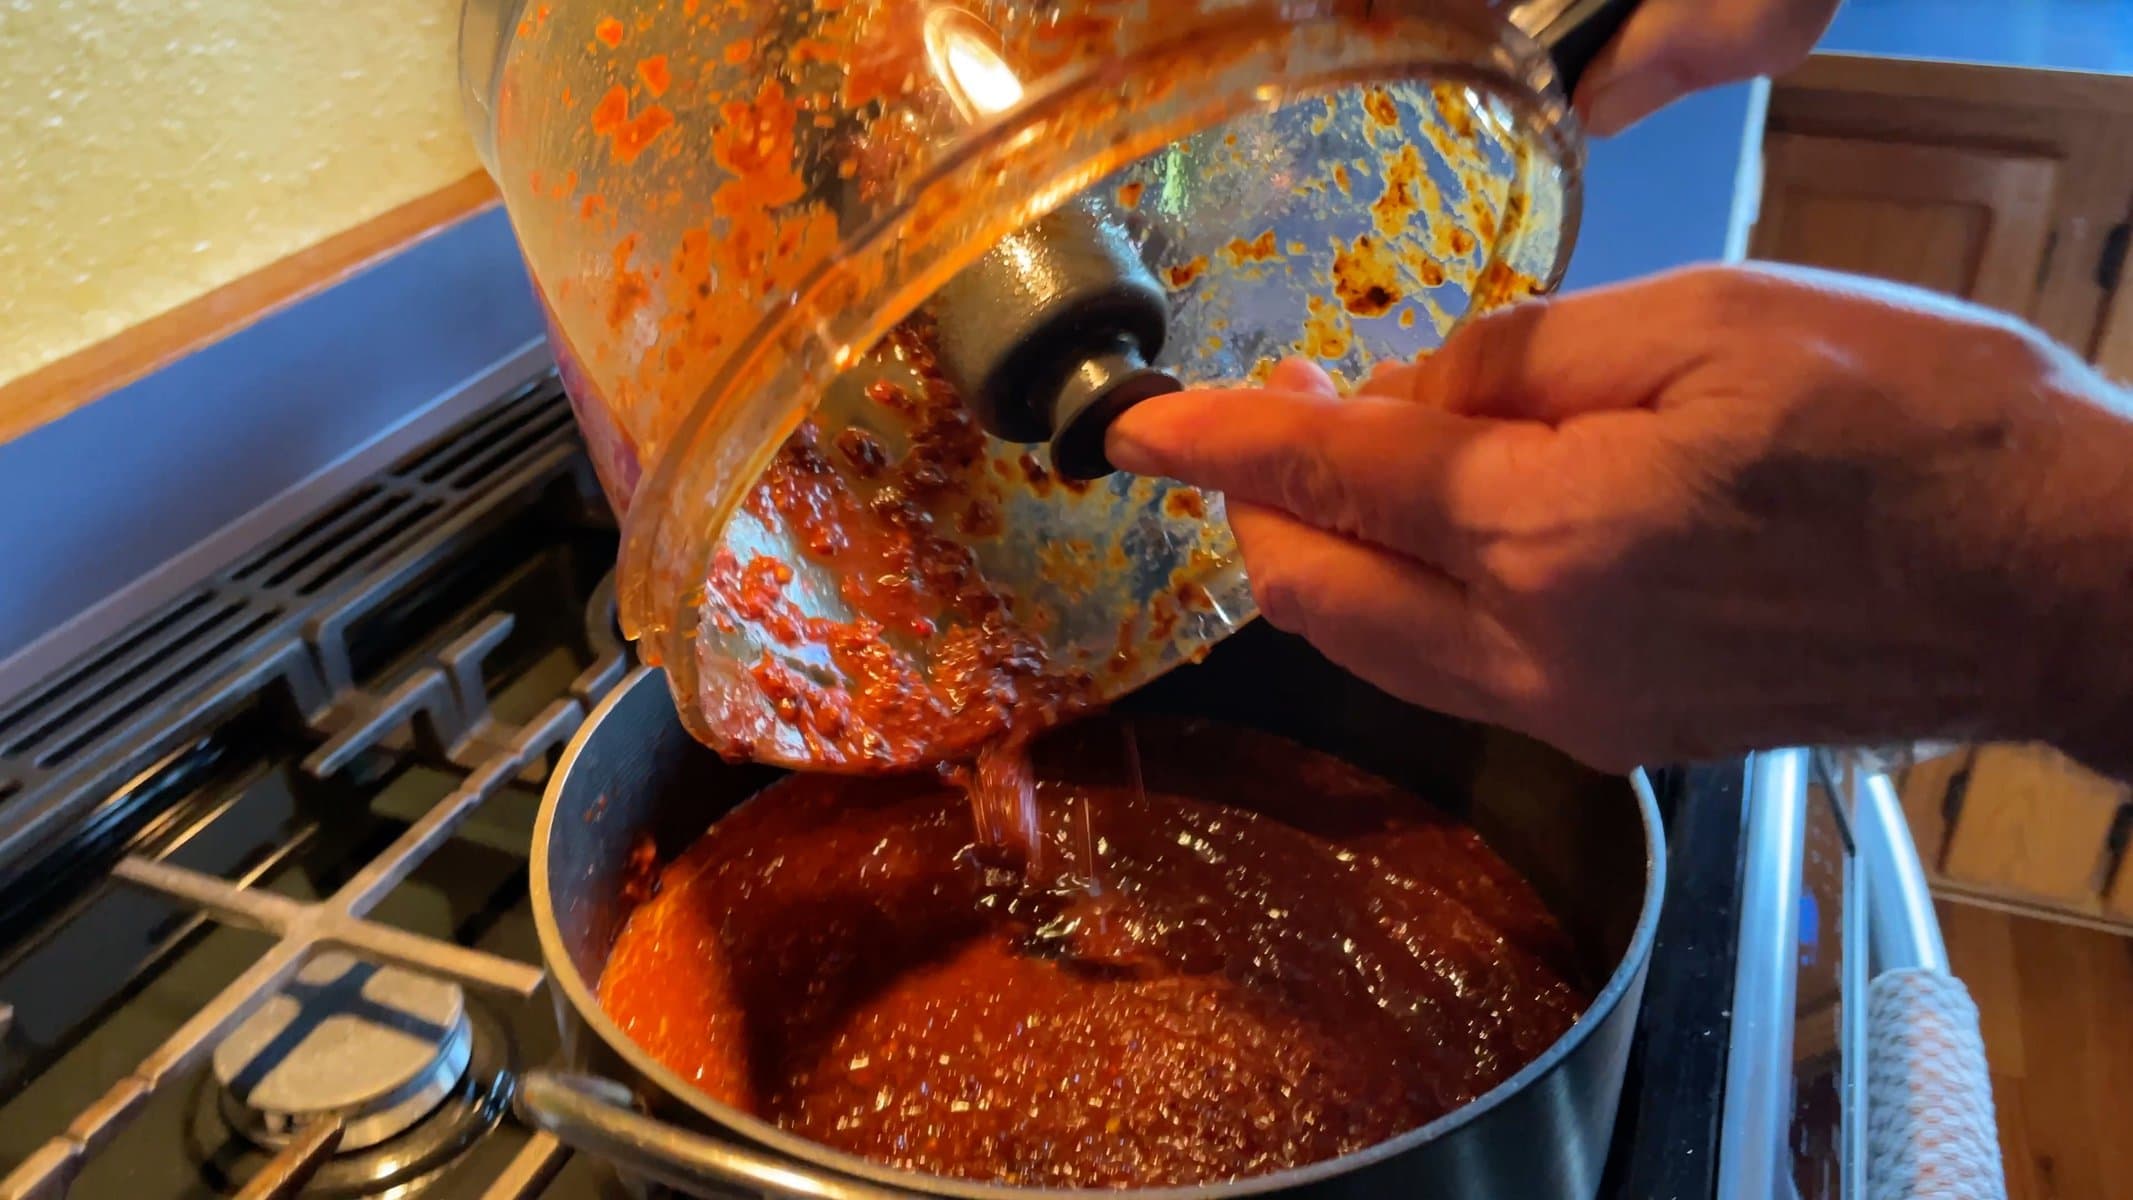 Pouring the sauce into hot oil in the pan